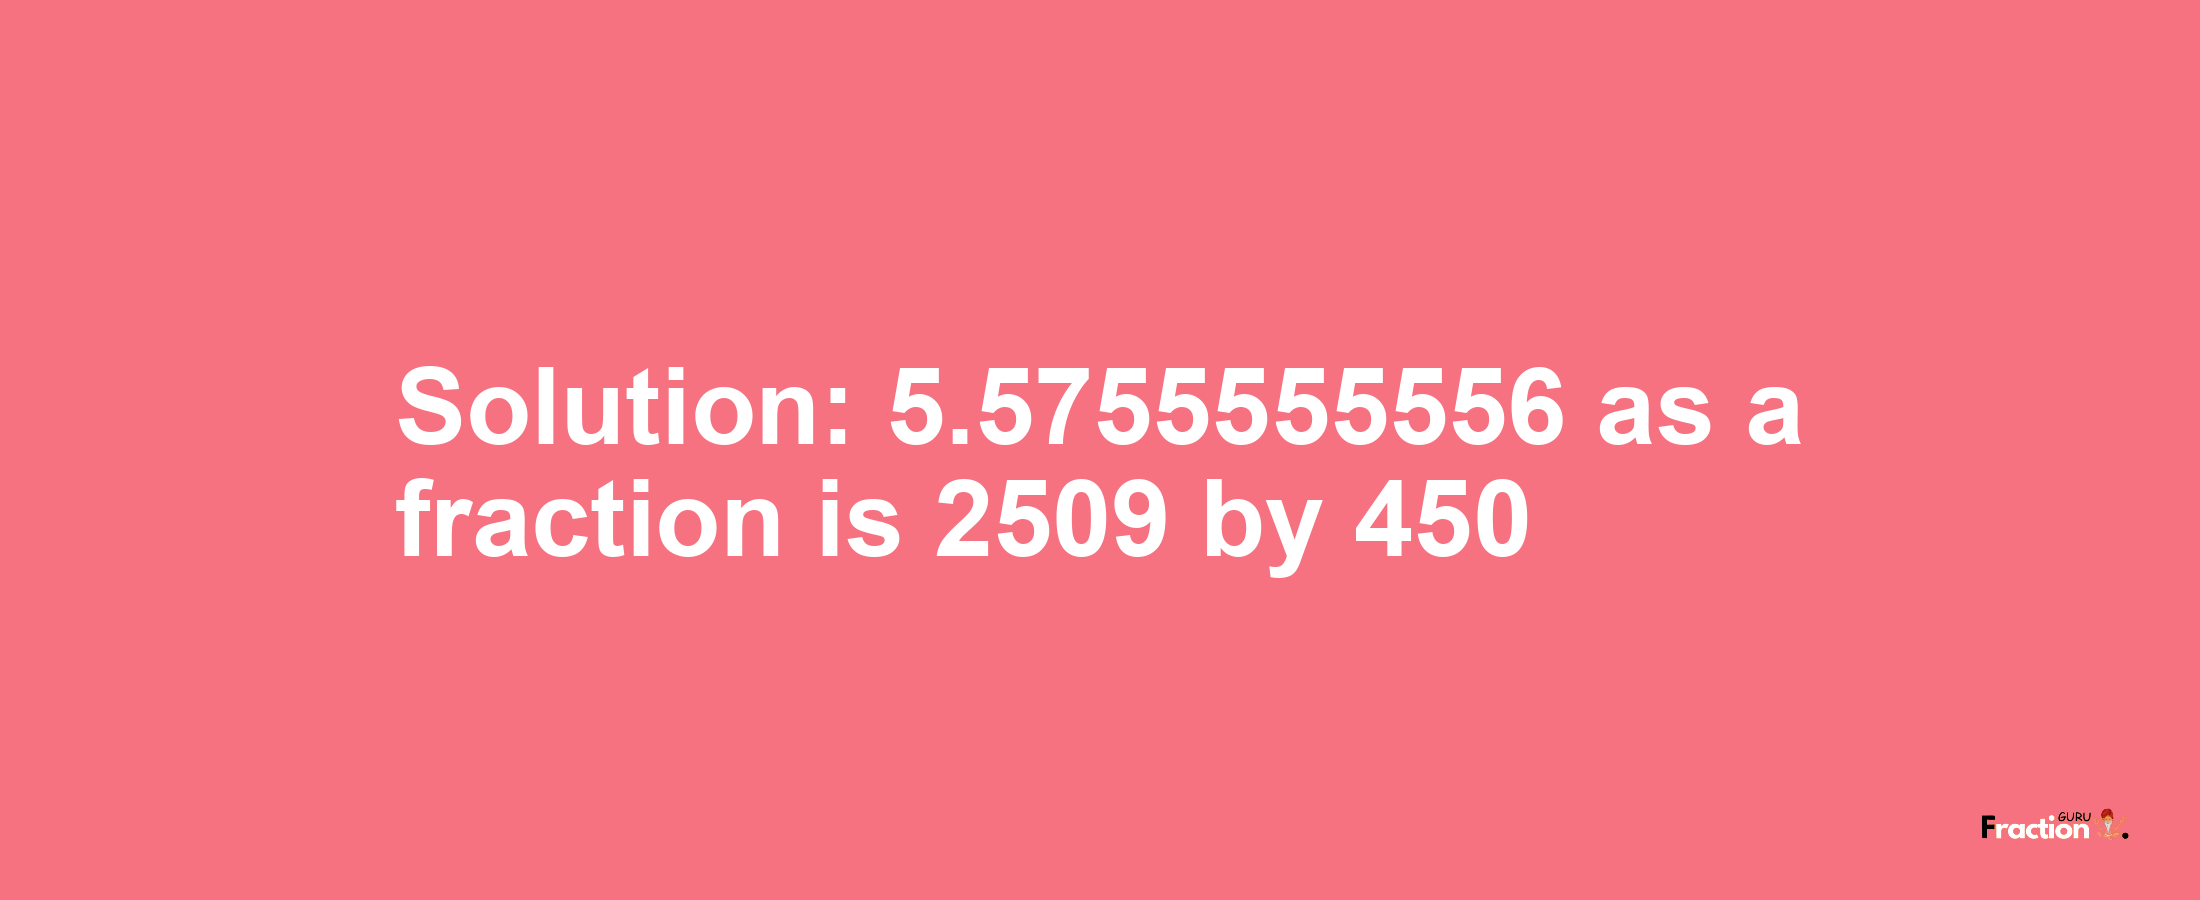 Solution:5.5755555556 as a fraction is 2509/450